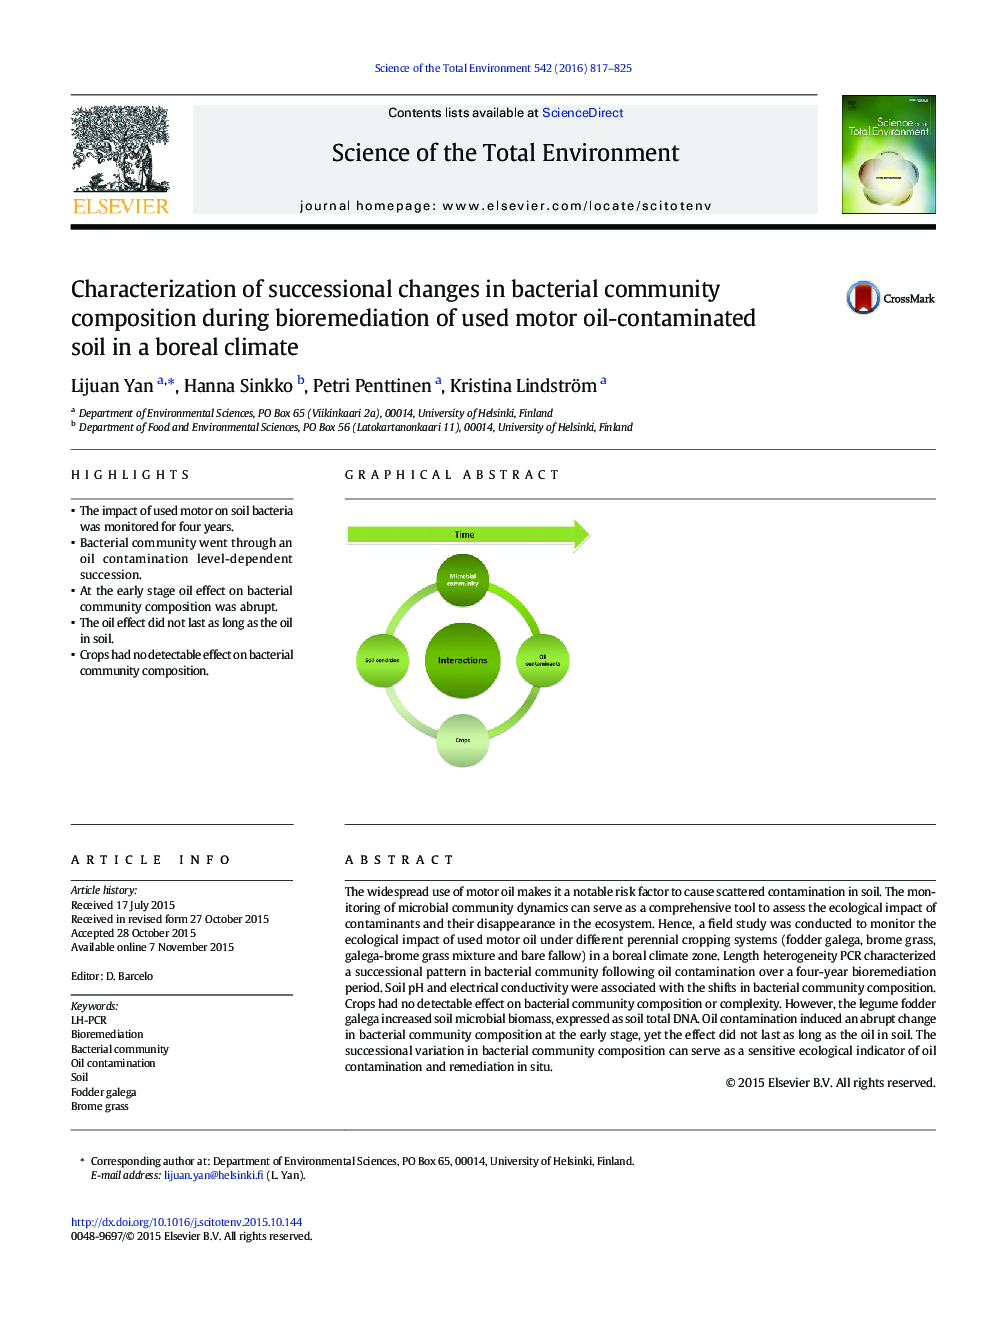 Characterization of successional changes in bacterial community composition during bioremediation of used motor oil-contaminated soil in a boreal climate